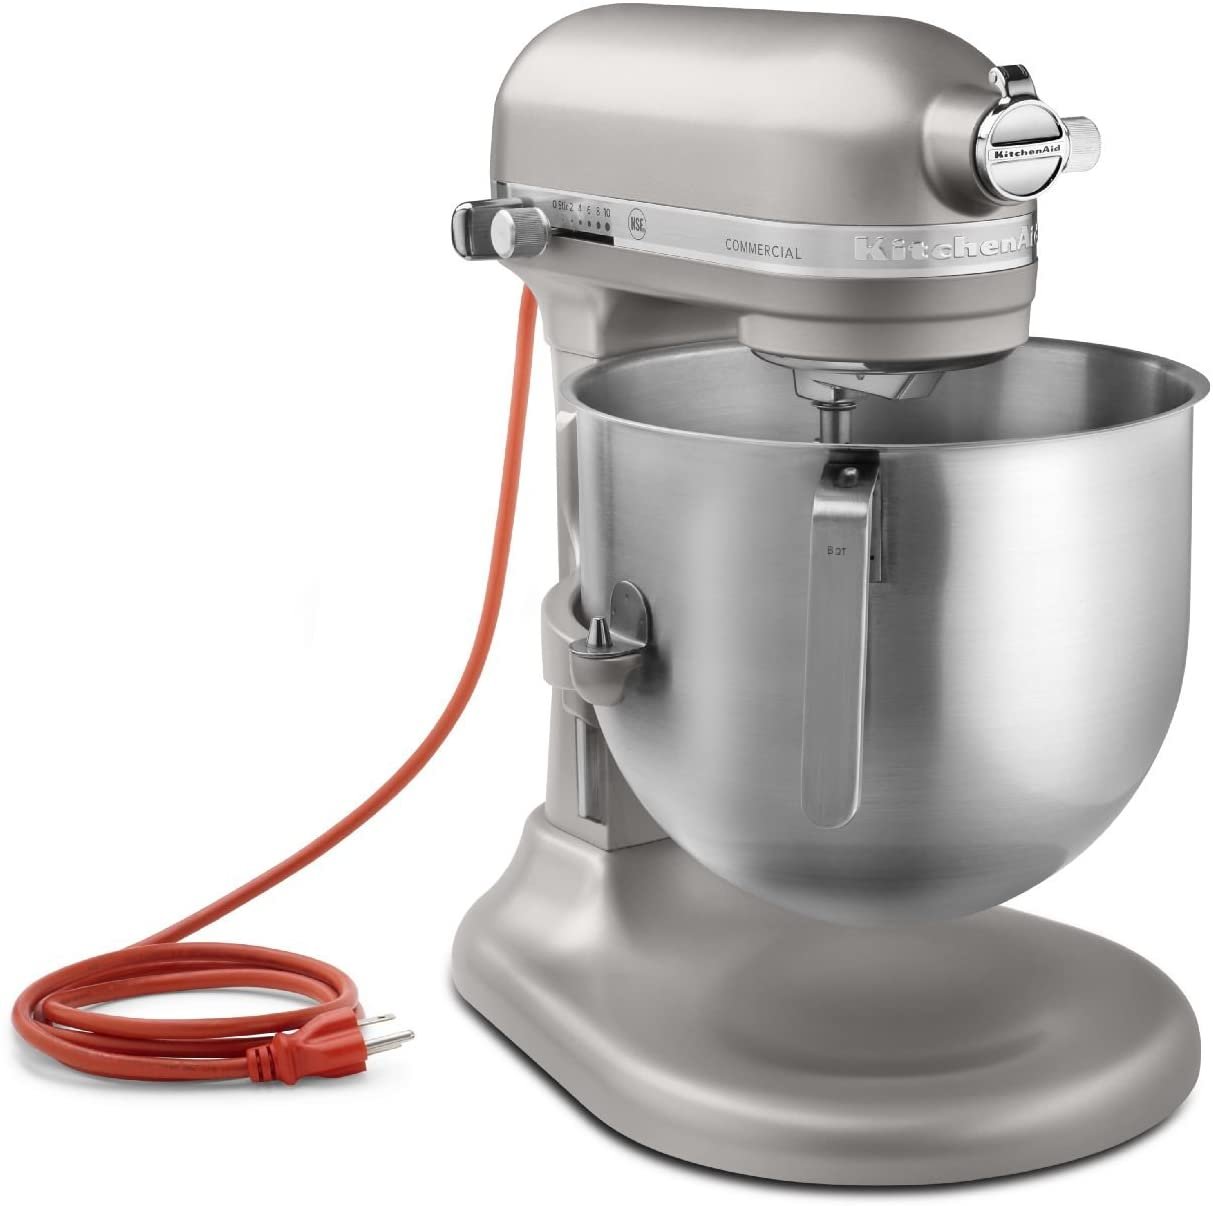 KitchenAid NSF Certified Commercial Series 8 Quart Bowl Lift Stand Mixer, - image 1 of 8